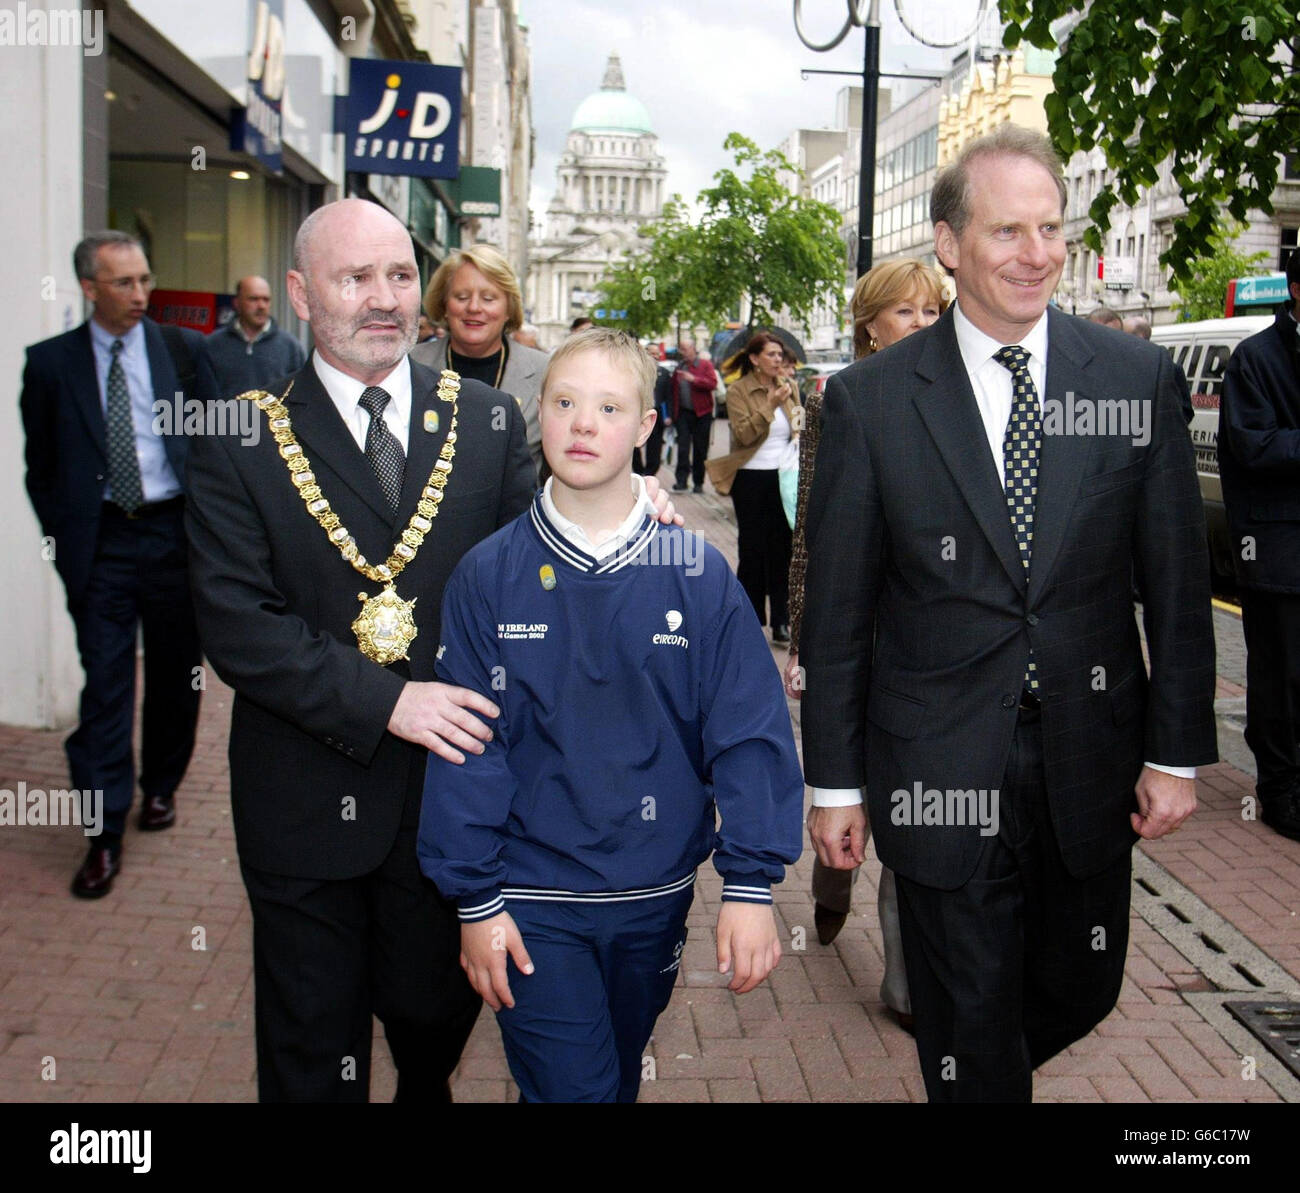 The United States Special Envoy to Northern Ireland, Ambassador Richard Haass (right), joins Belfast Mayor, Alex Maskey, and Special Olympic competitor, Sean Maguire, from Noth Belfast, on a walkabout in Belfast city centre, ahead of the 2003 Special Olmpics World Summer Games. Belfast will be acting as host city to more than 1,300 athletes and support staff from Team USA, who will be visiting Ireland for the 11th Special Olympics in exactly one month s time. Stock Photo